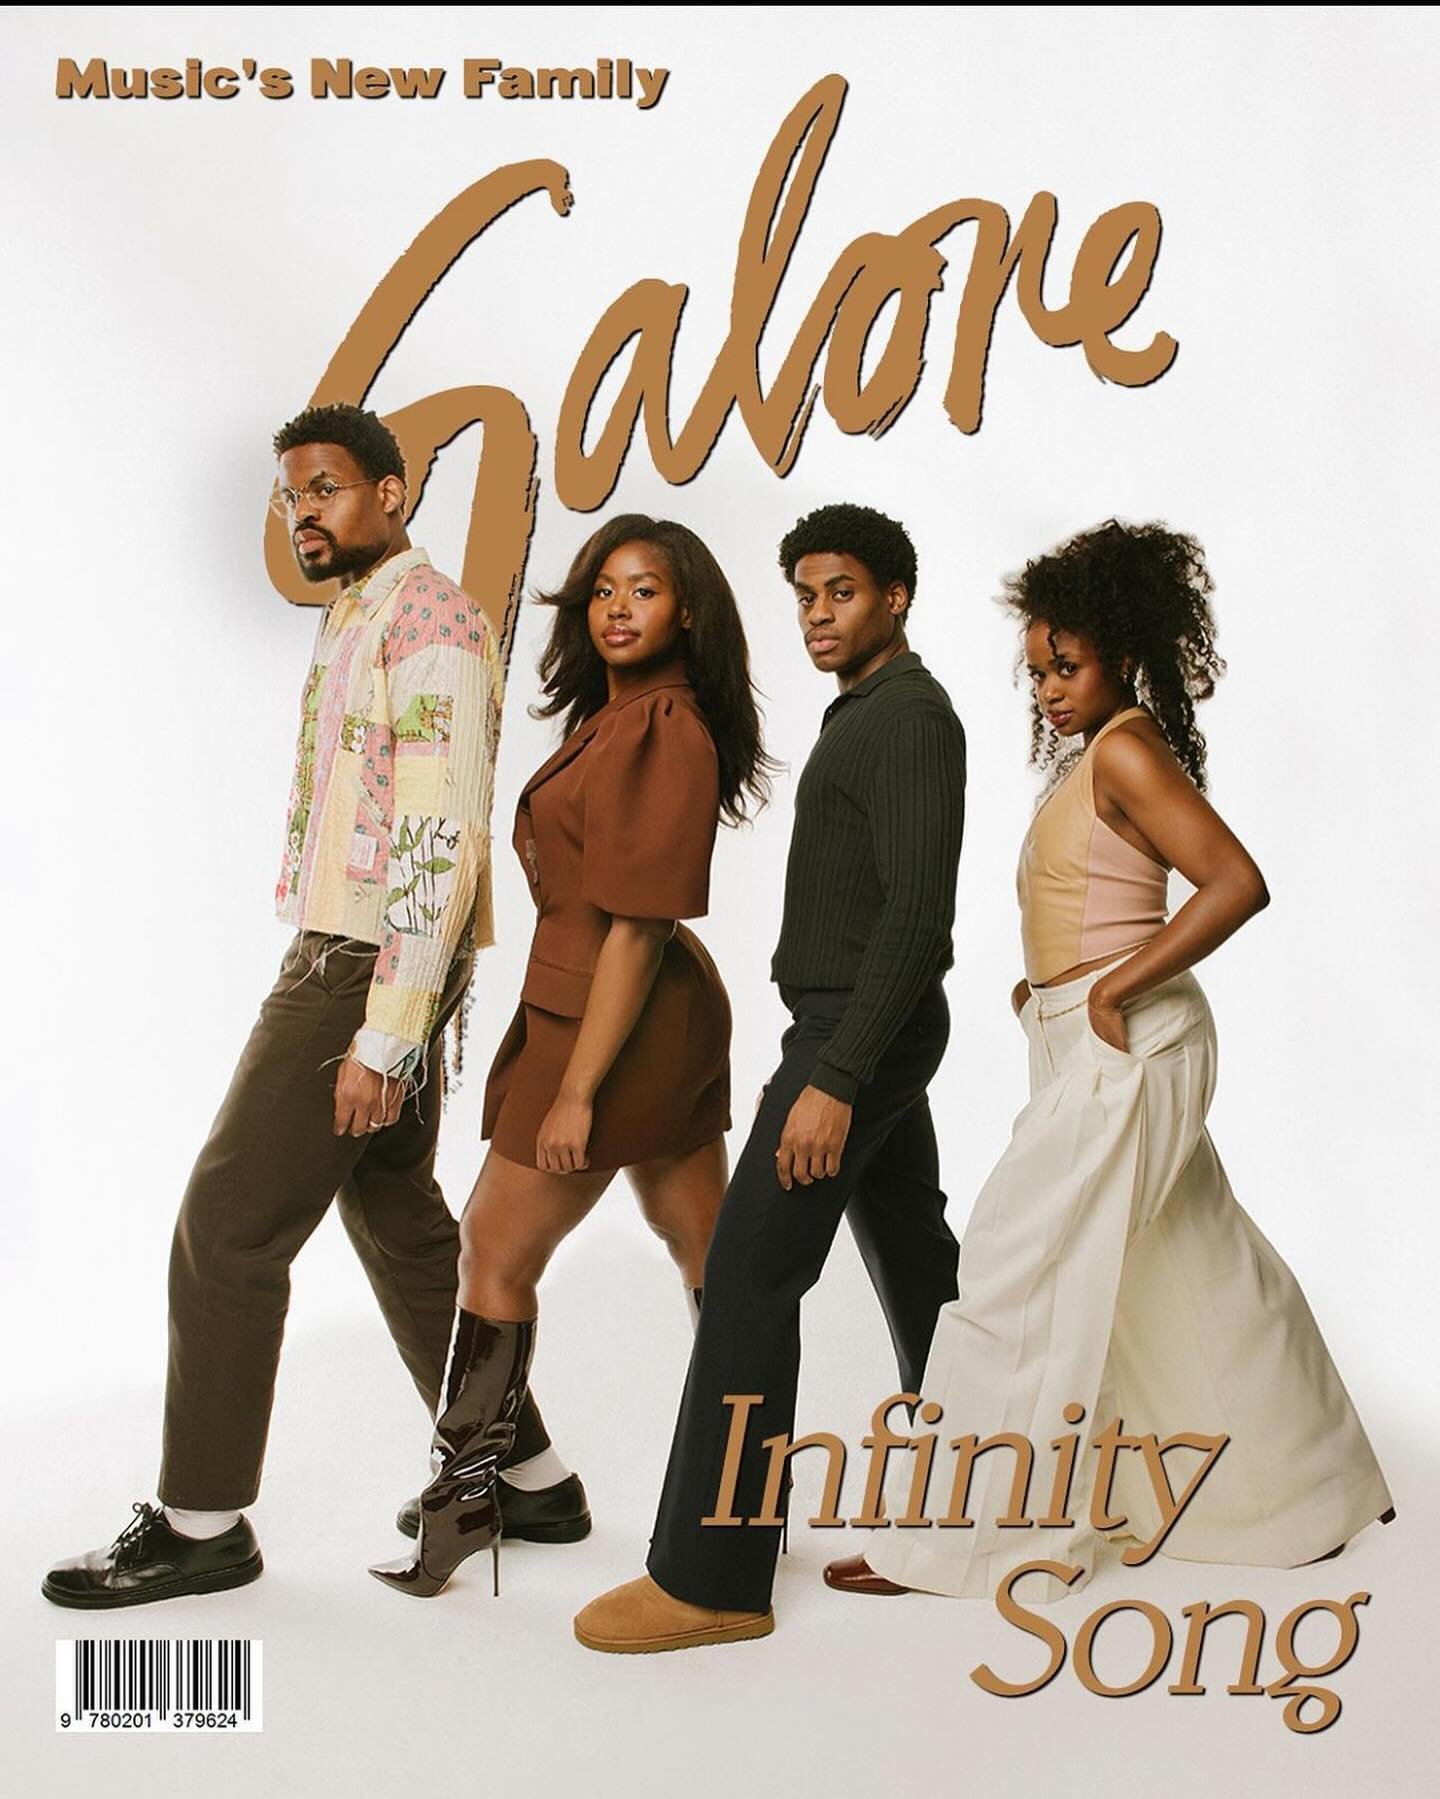 Congratulations to Music&rsquo;s New Family @infinitysong on their @galore cover! Special thanks to @princechenoastudio #fam #family #music #musician #band #artist #artistsoninstagram #rocnation #jay #jayz